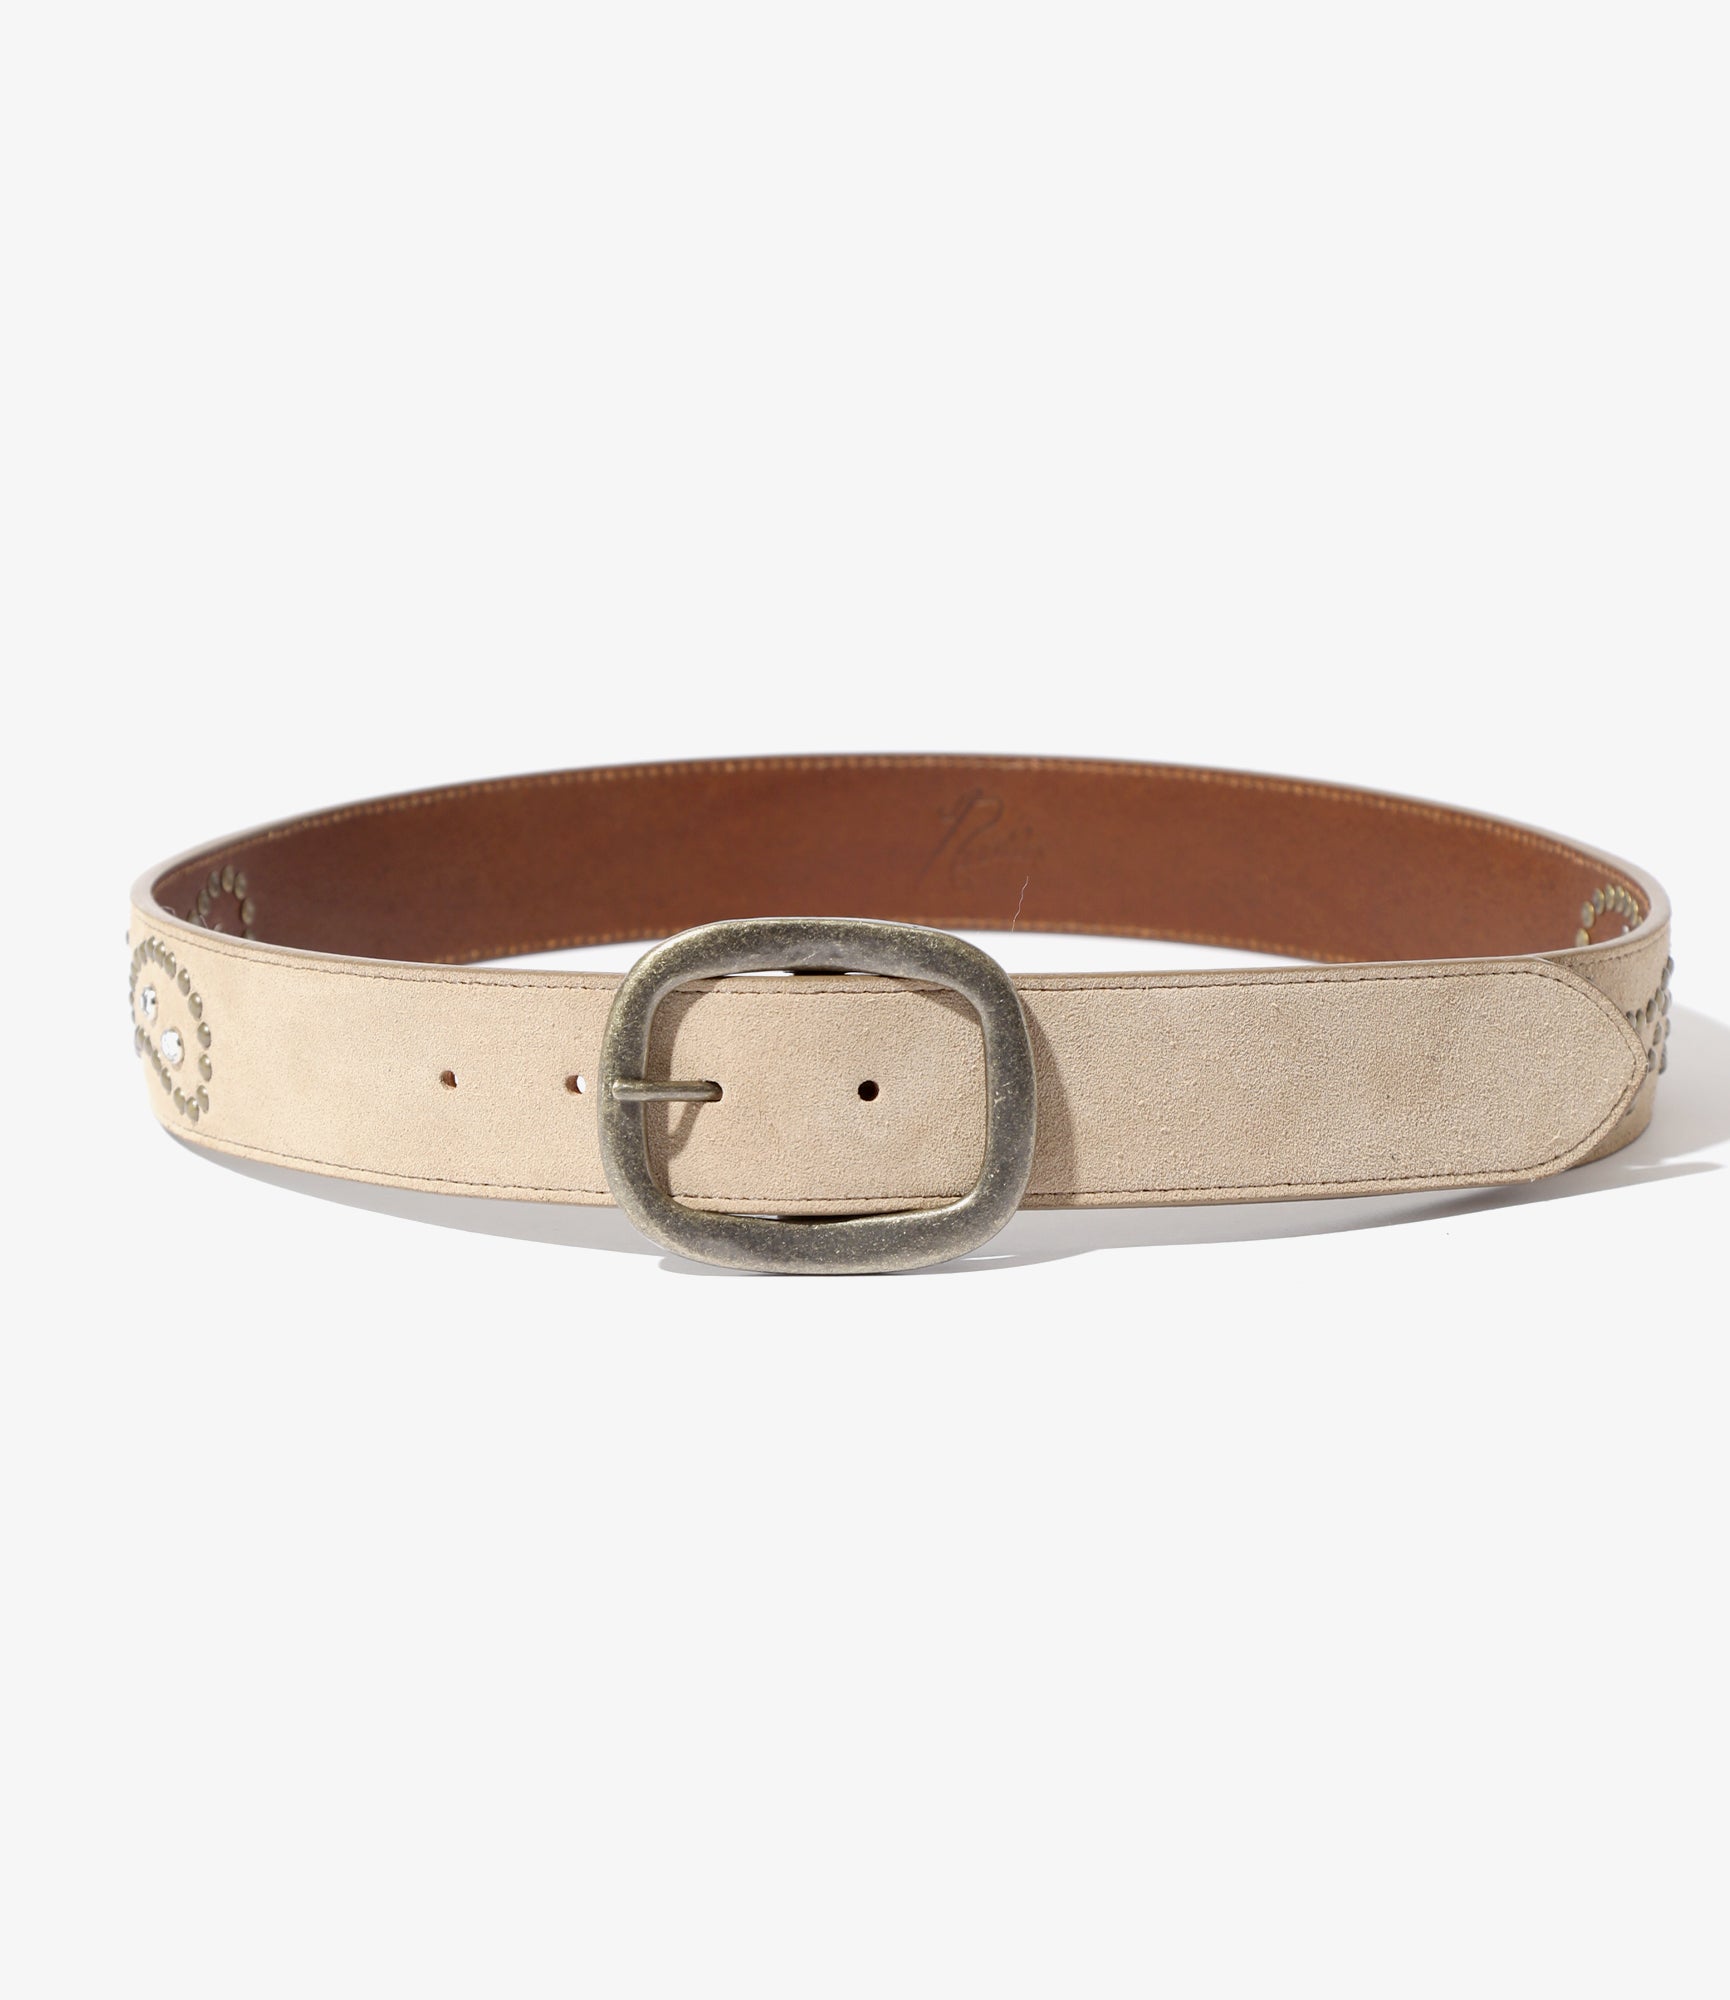 Paisley Studs Belt - Taupe - Suede Leather